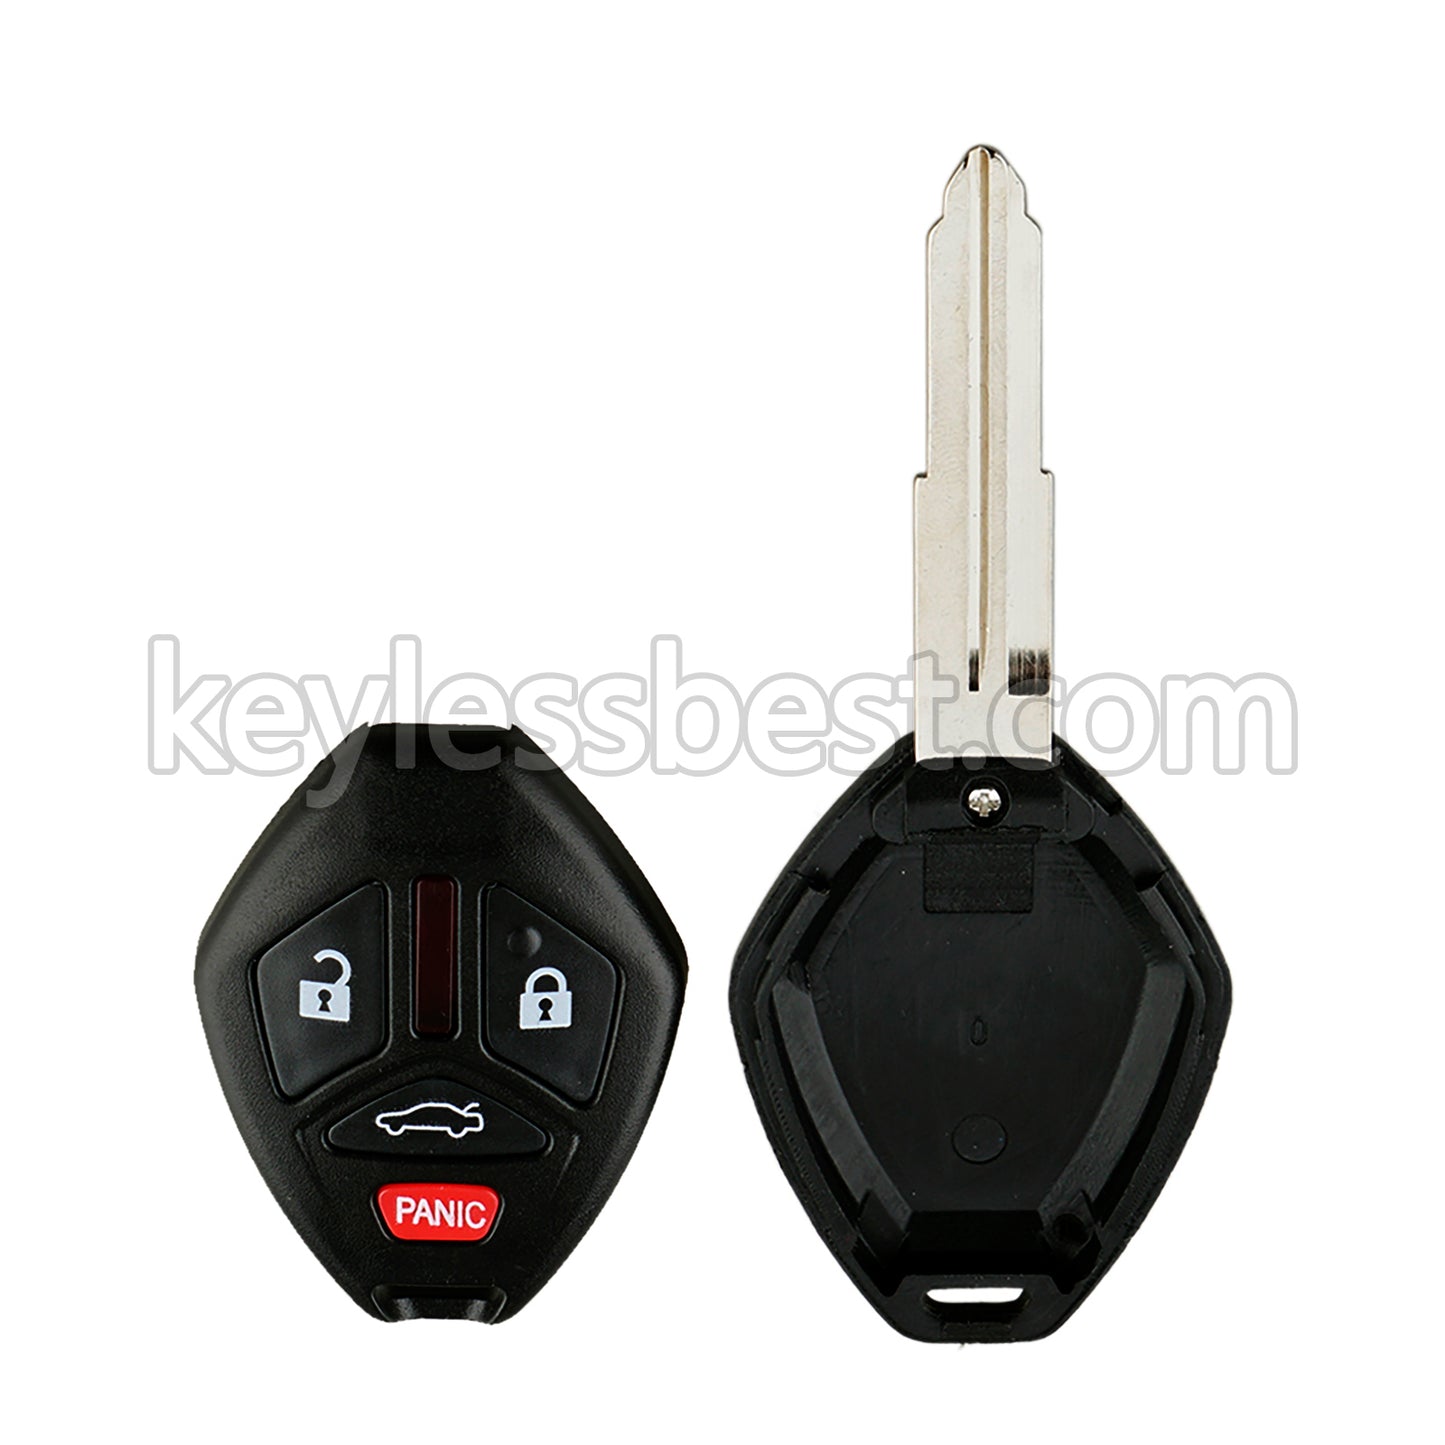 2007 - 2017 Mitsubishi I-MeiV Outlander / 4 Buttons Remote Key / OUCG8D-625M-A-HF / 315MHz